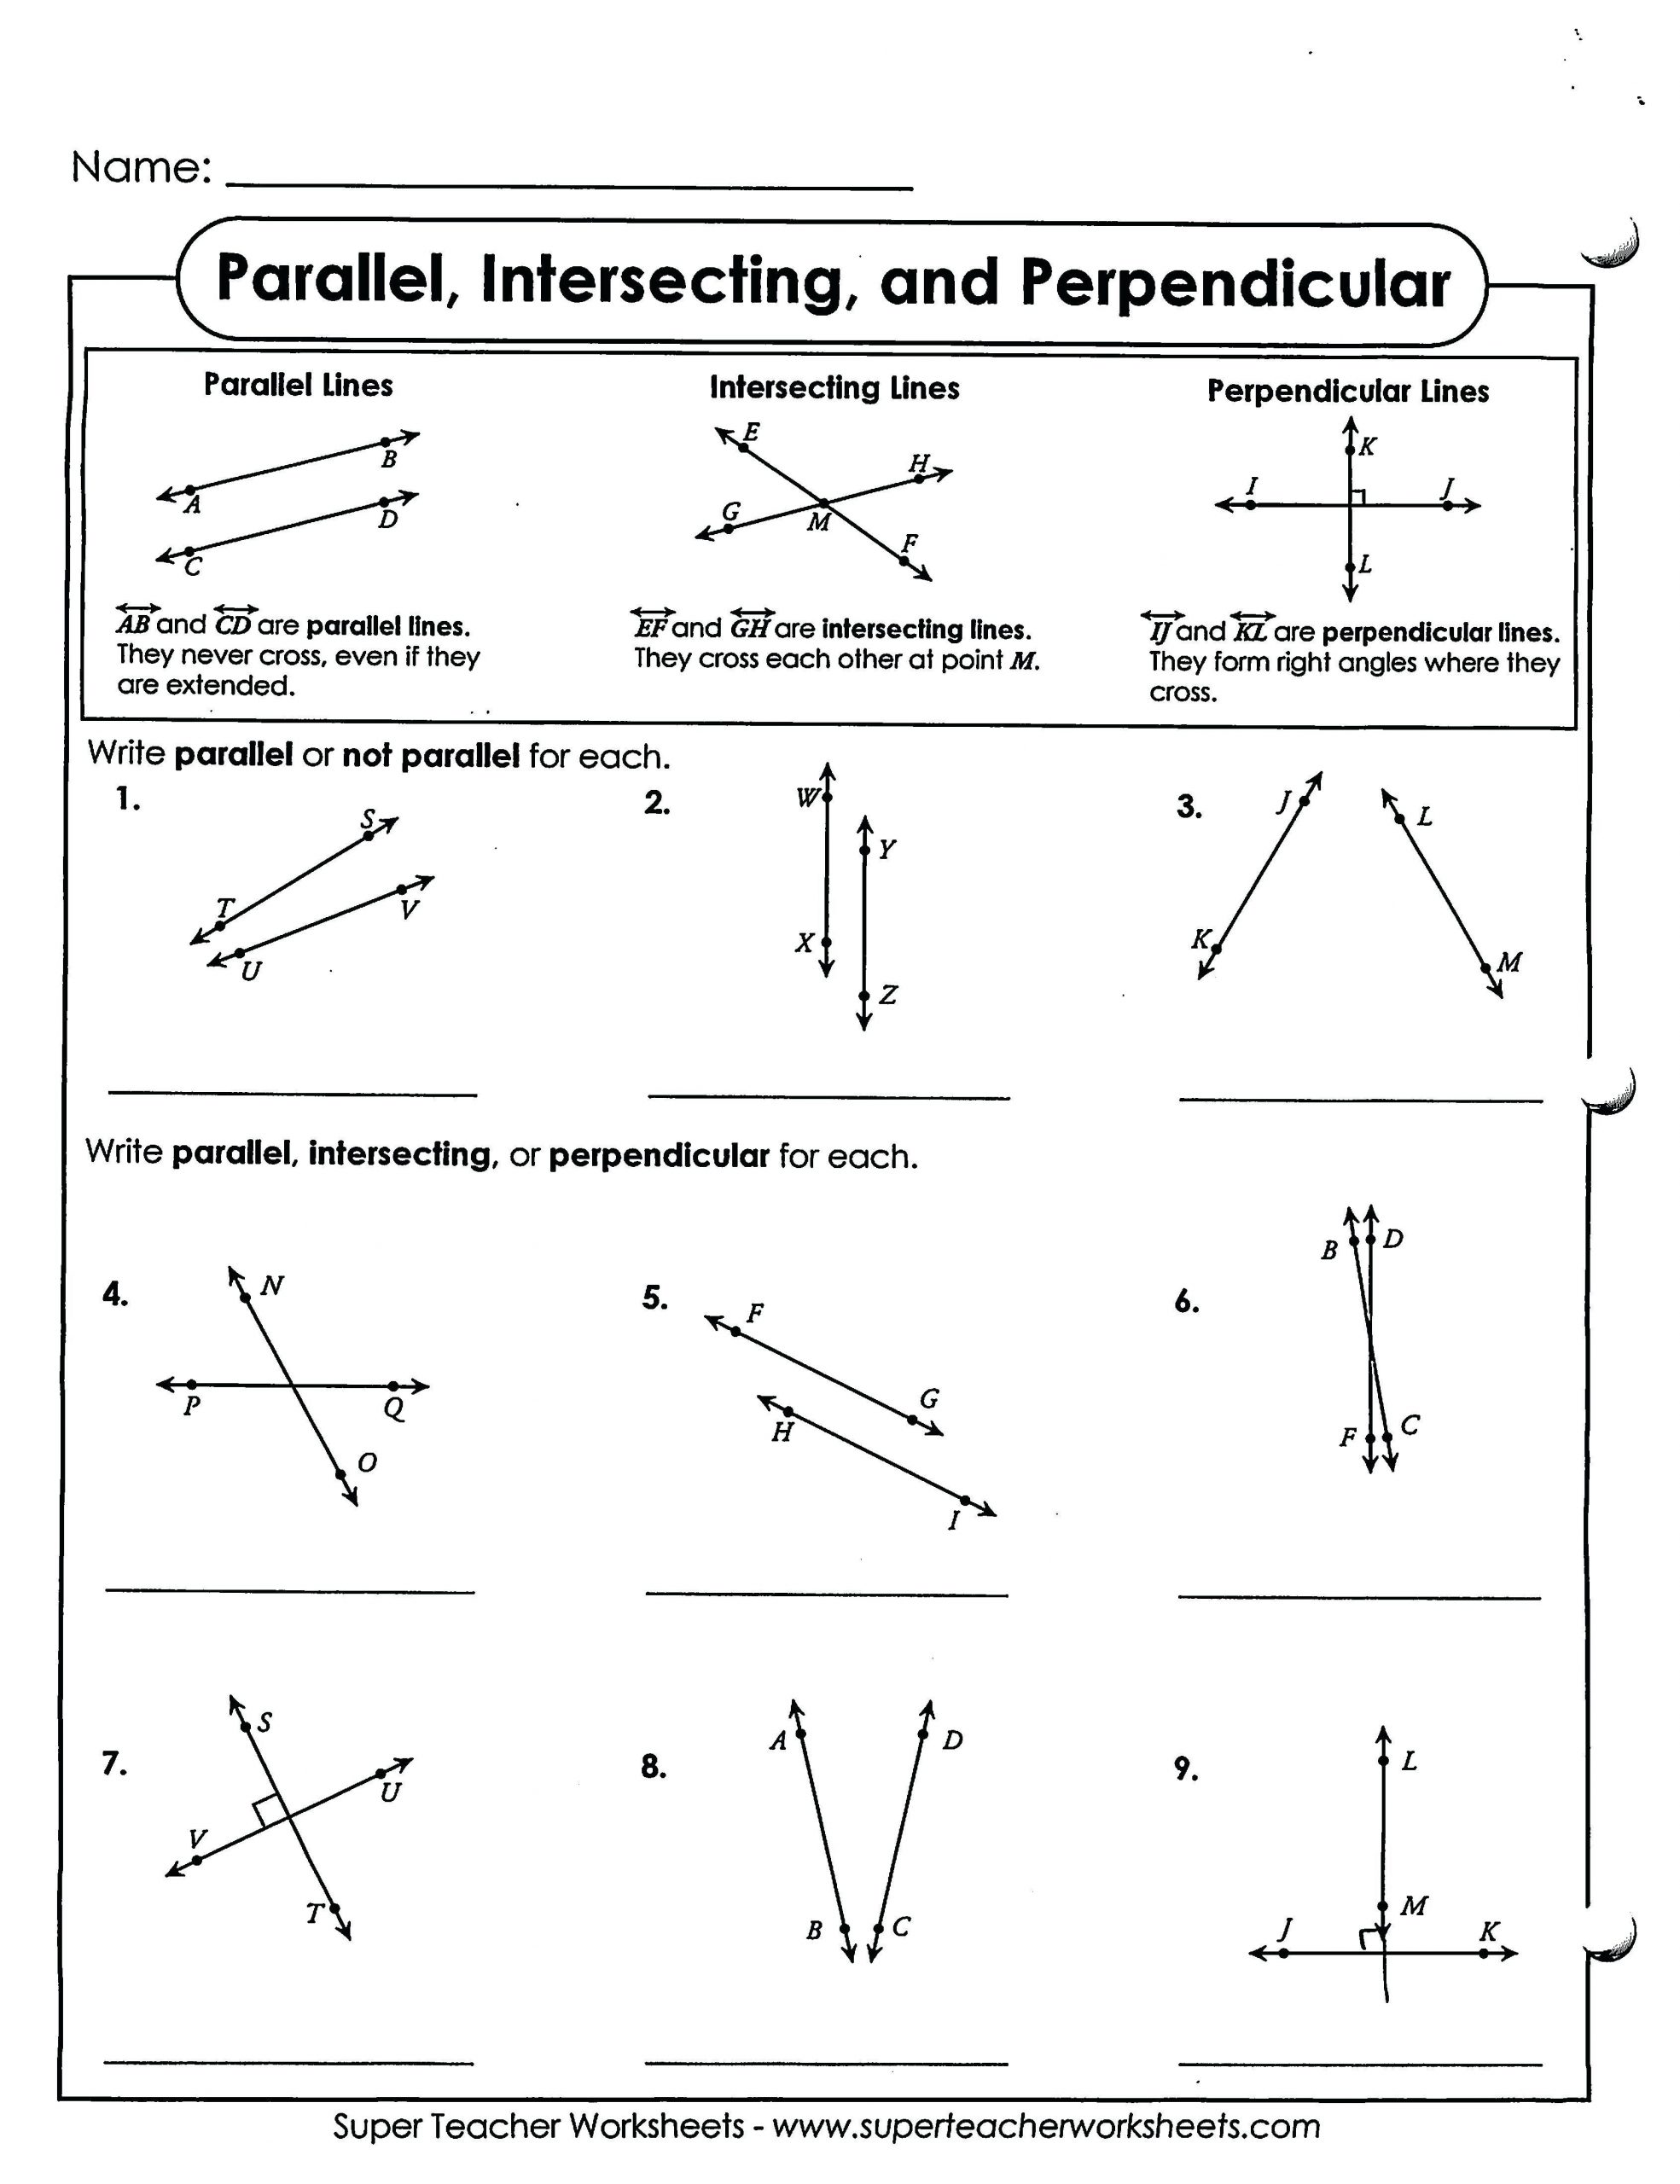 Parallel and Perpendicular Lines Worksheet Recent Parallel and Perpendicular Lines Worksheet Algebra 1